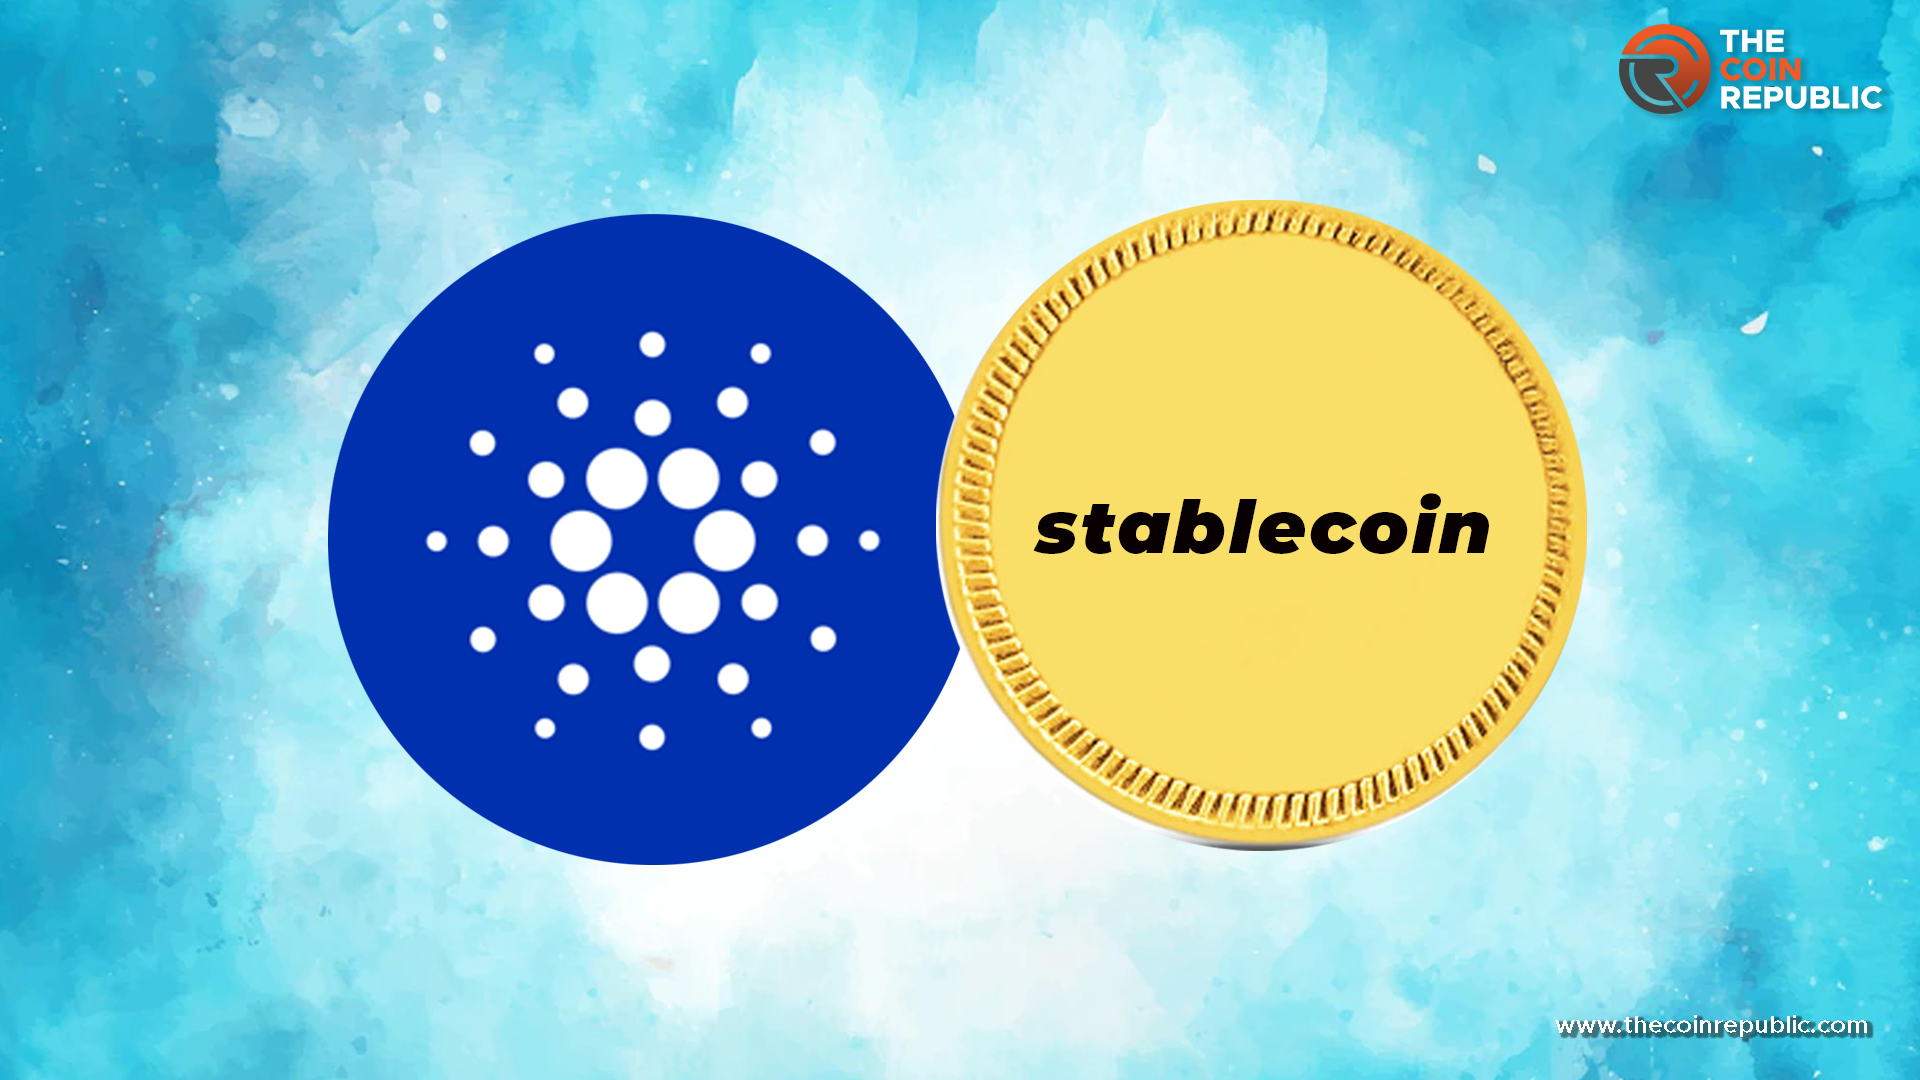 The Role of Stablecoins in Cardano’s DeFi Ecosystem